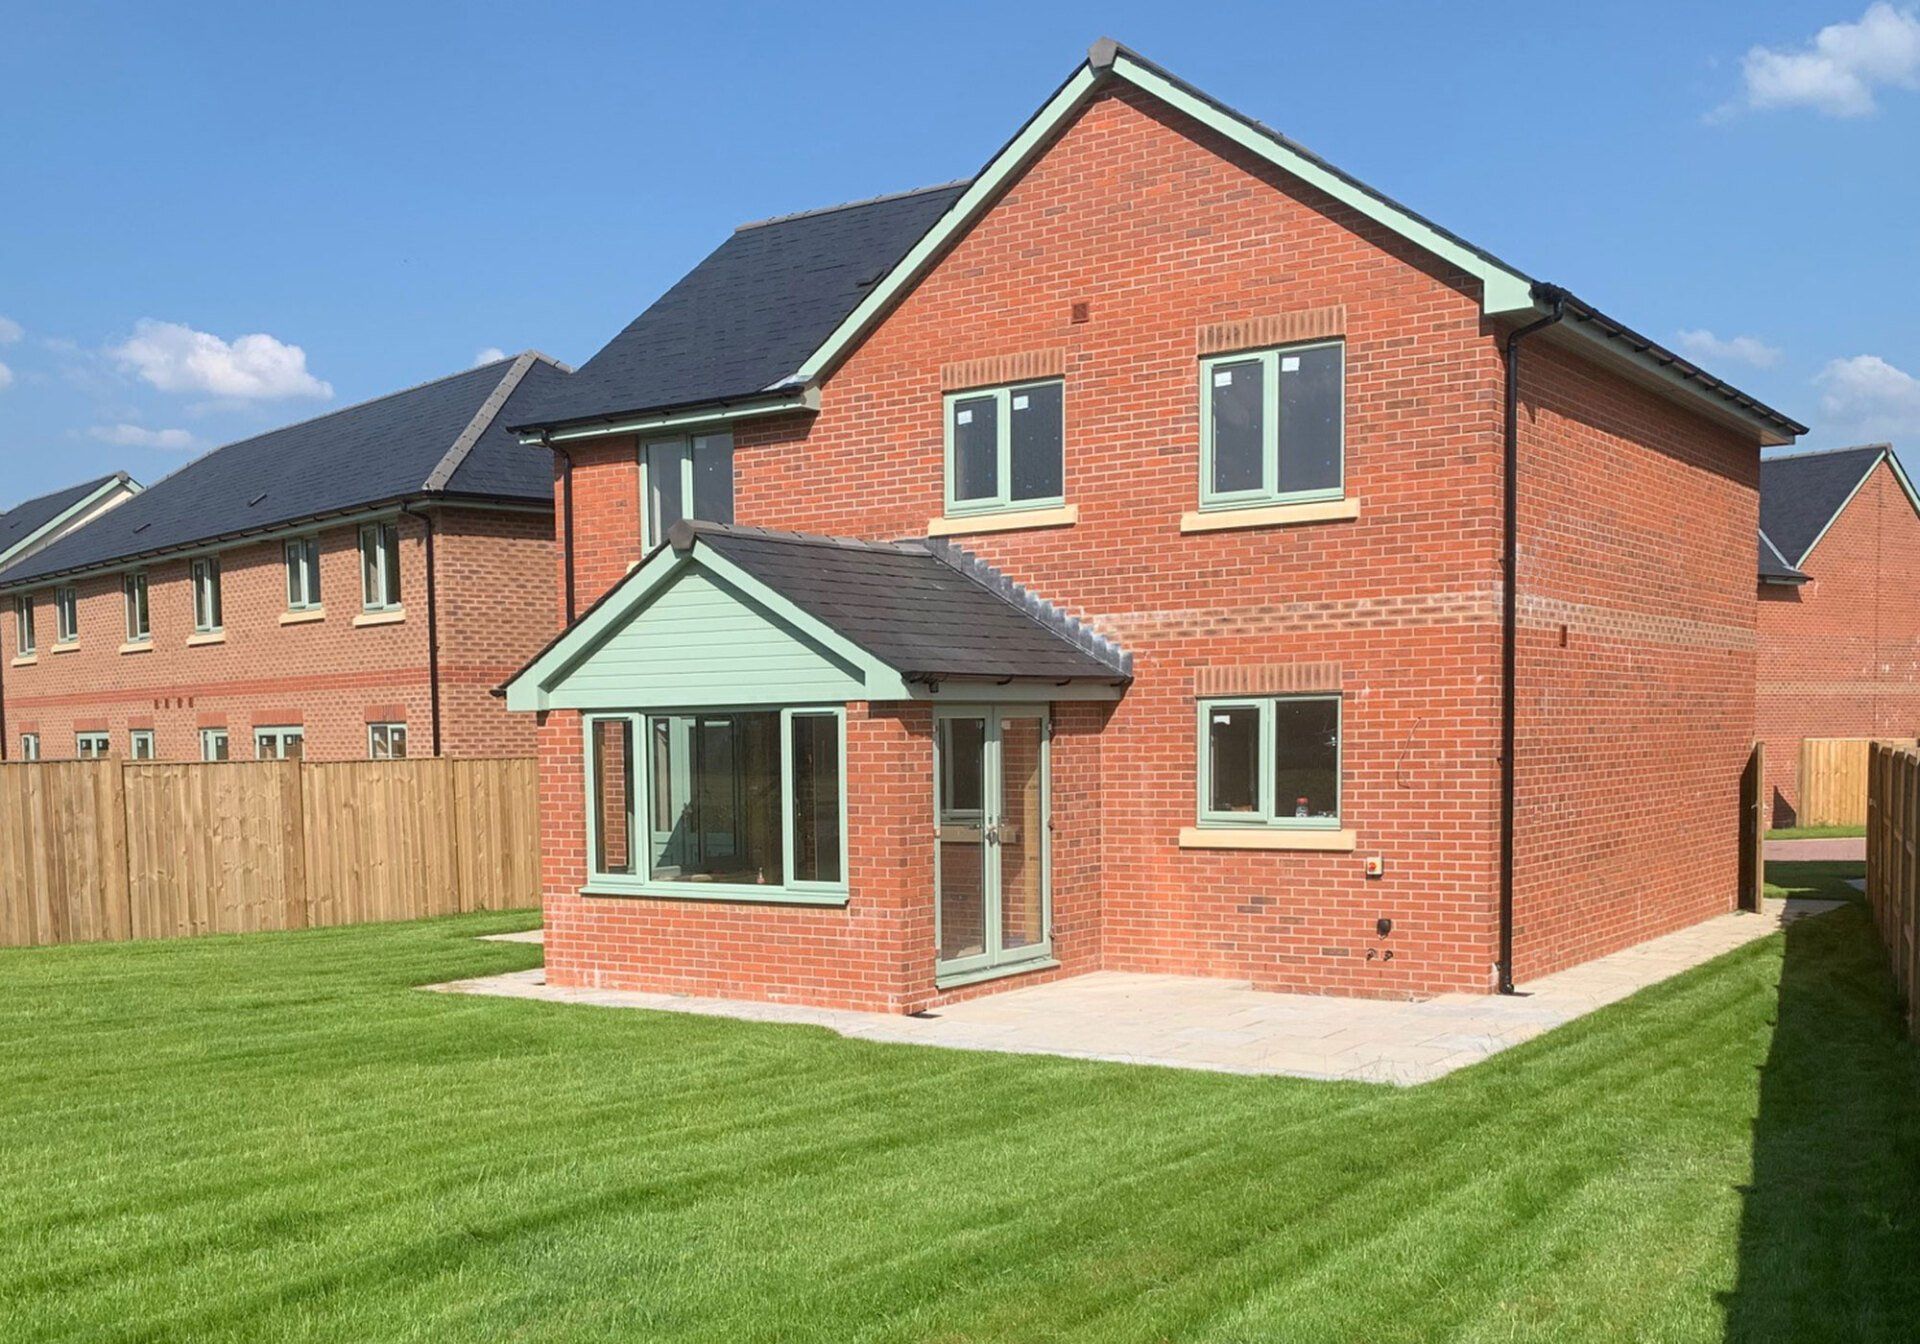 Rear view of Llandovery (plot 2), with a newly laid lawn.